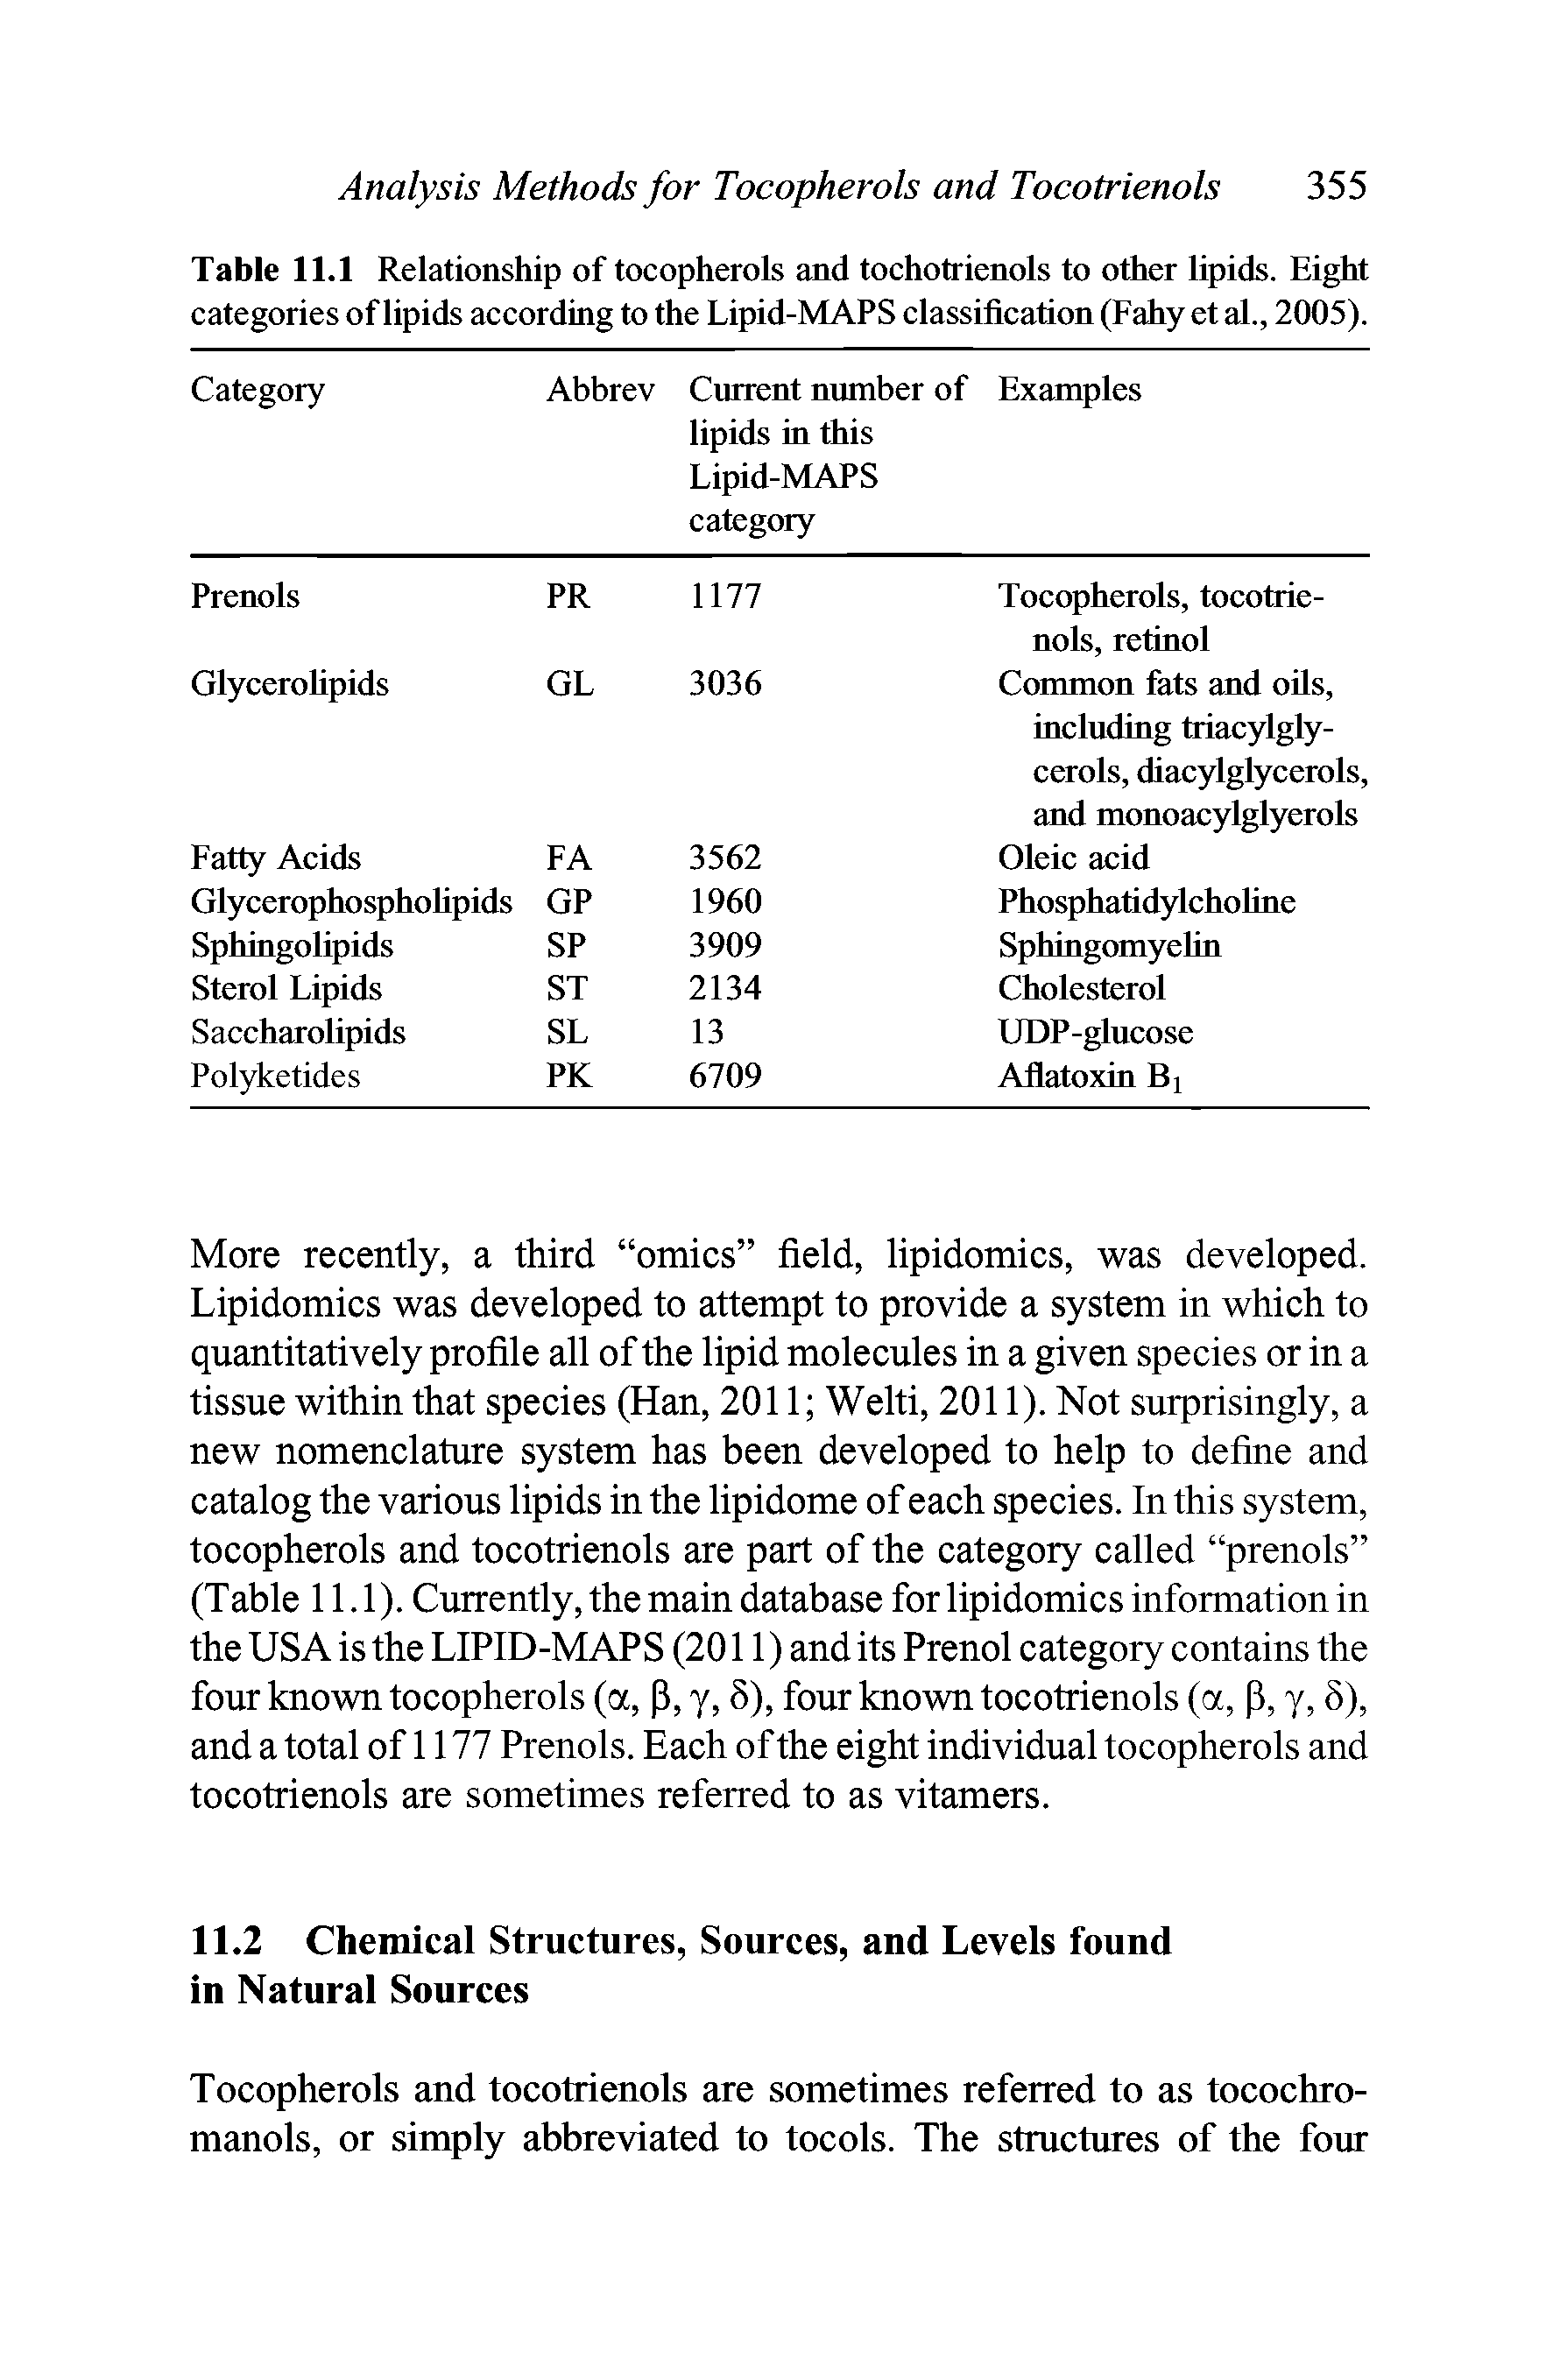 Table 11.1 Relationship of tocopherols and tochotrienols to other lipids. Eight categories of lipids according to the Lipid-MAPS classification (Fahy et al., 2005).